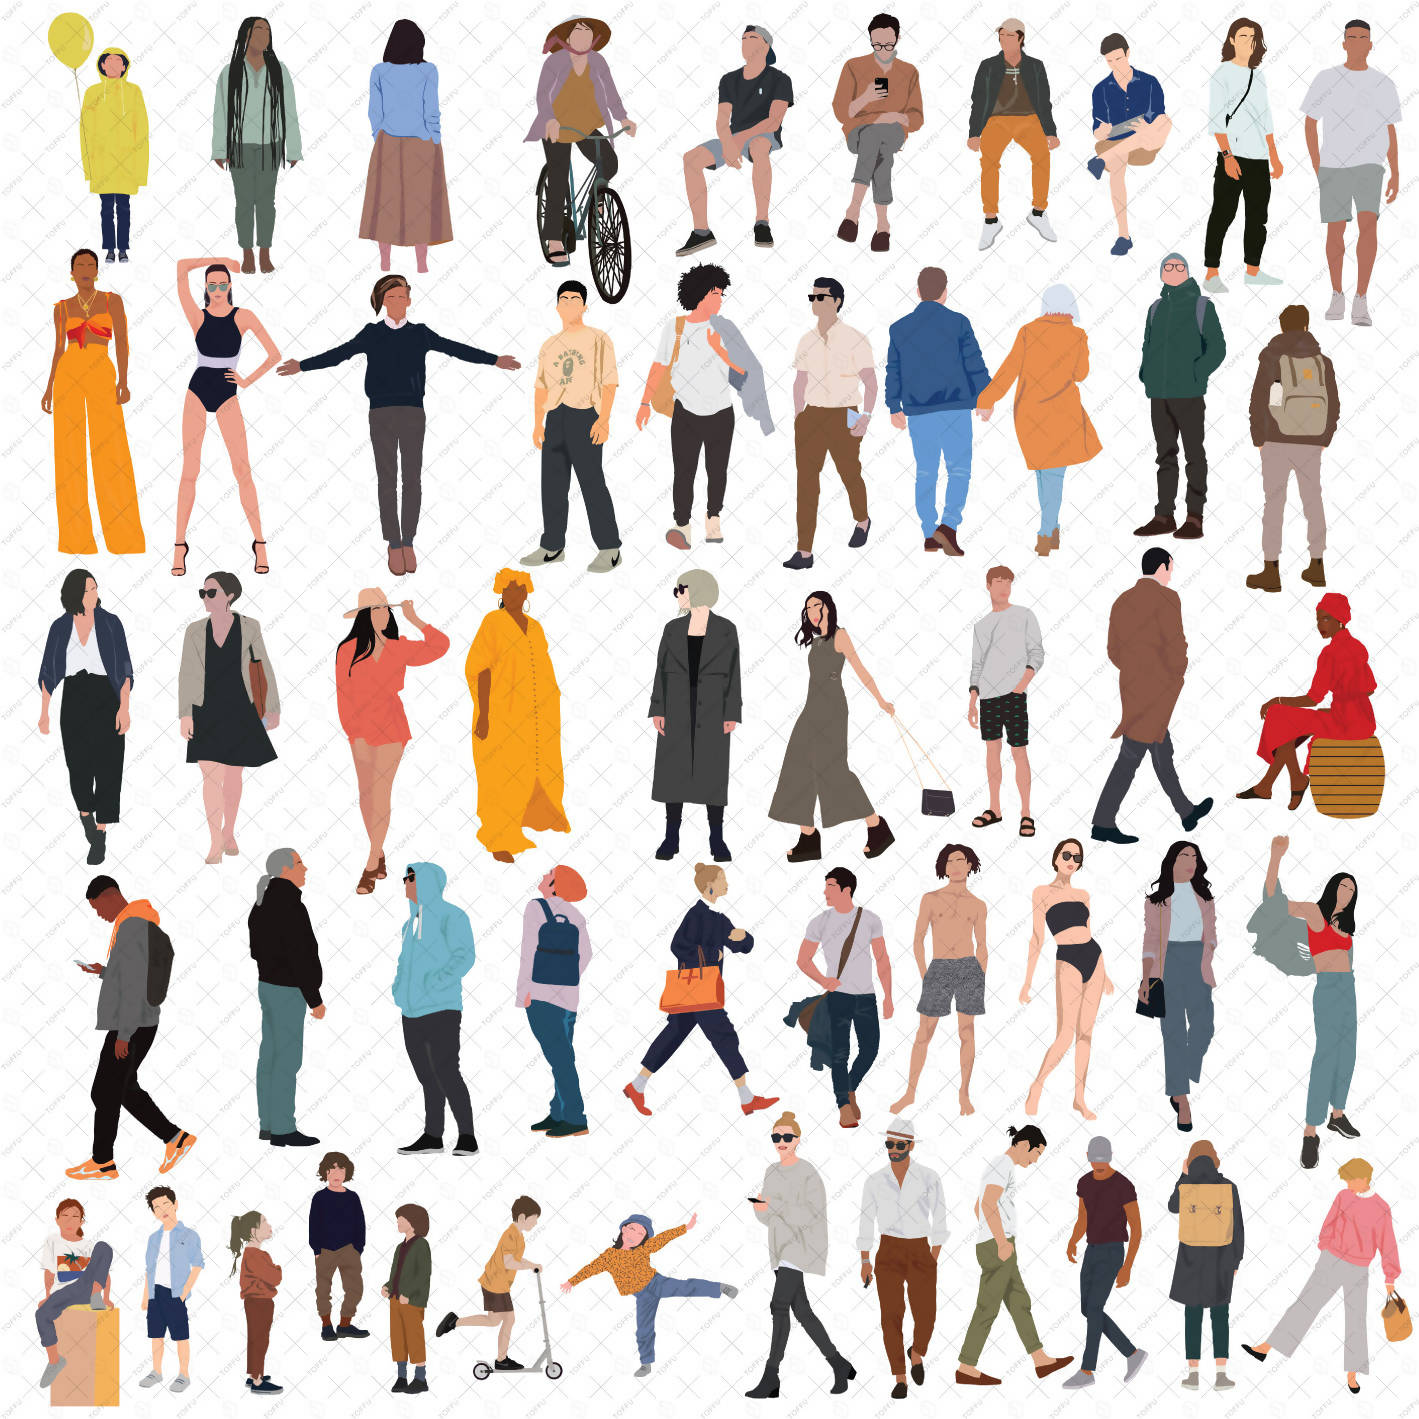 Flat Vector Human Scales (52 figures) PNG - Toffu Co